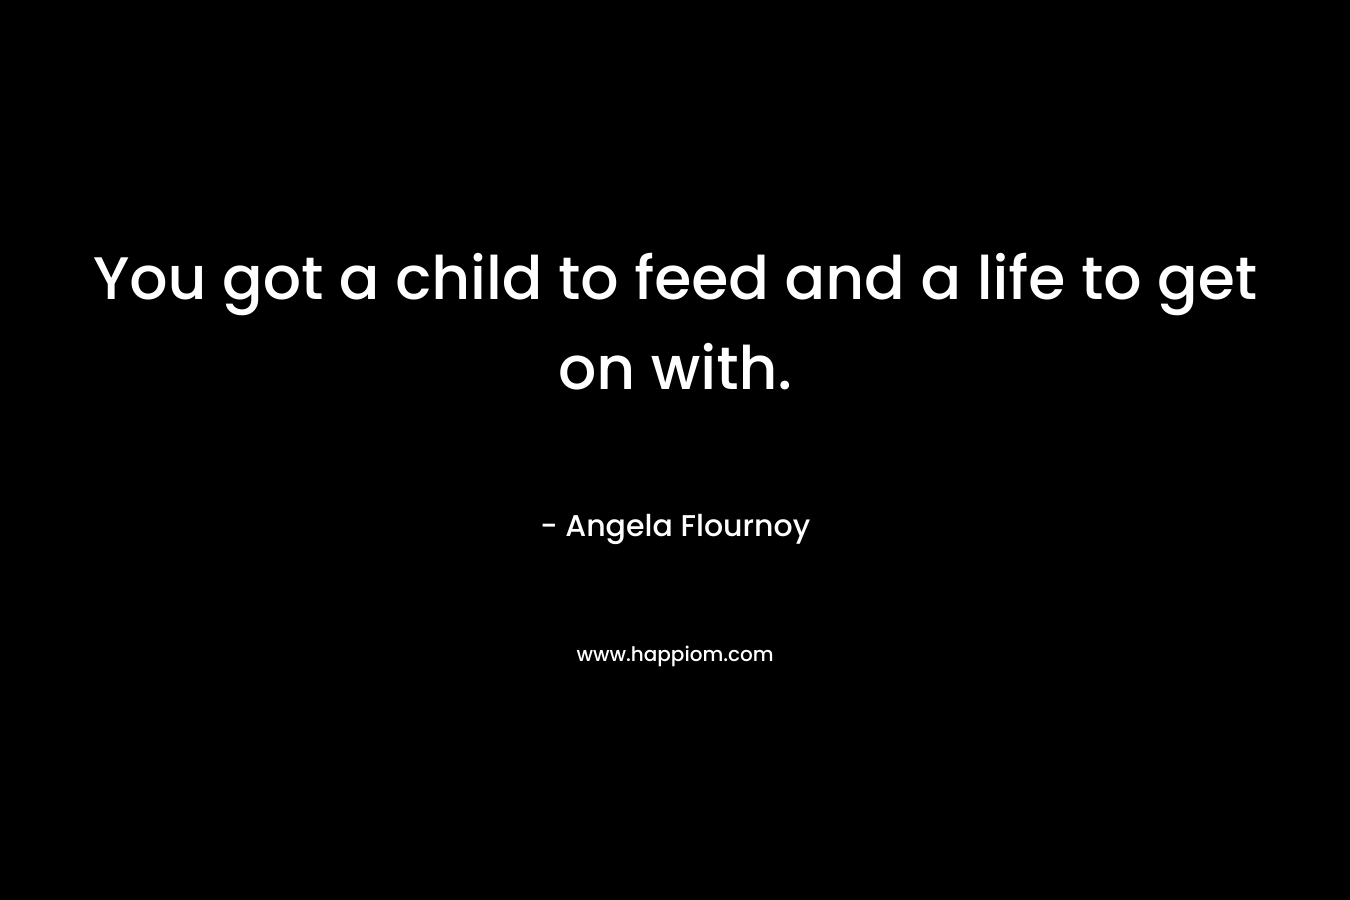 You got a child to feed and a life to get on with. – Angela Flournoy